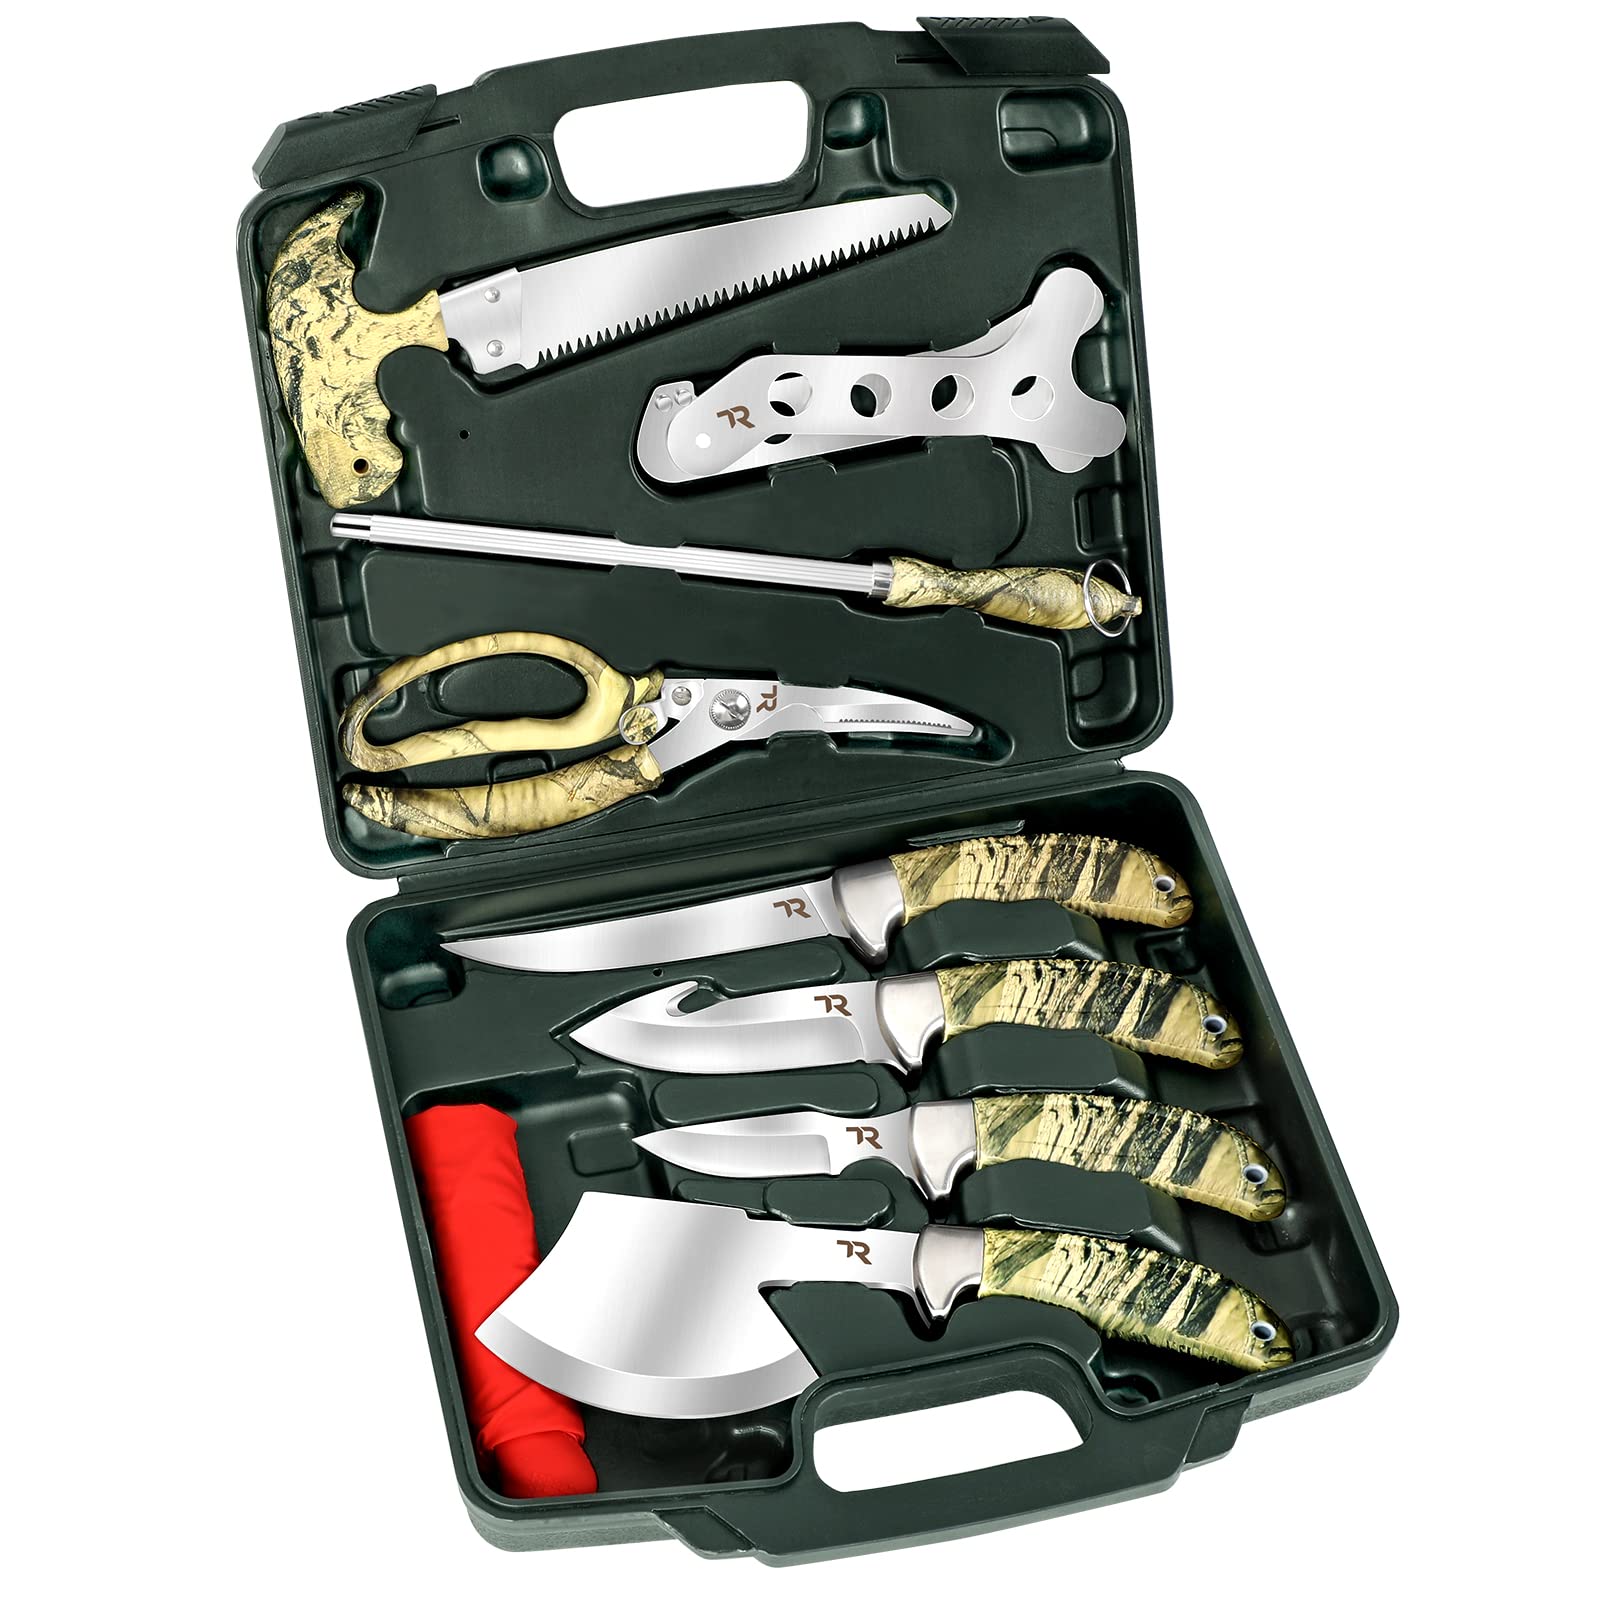 TR Field Dressing Kit Hunting Knife Set, 10-Piece Portable Butcher Game Processing Kit for Deer Hunting, Survival, Fishing, Camping